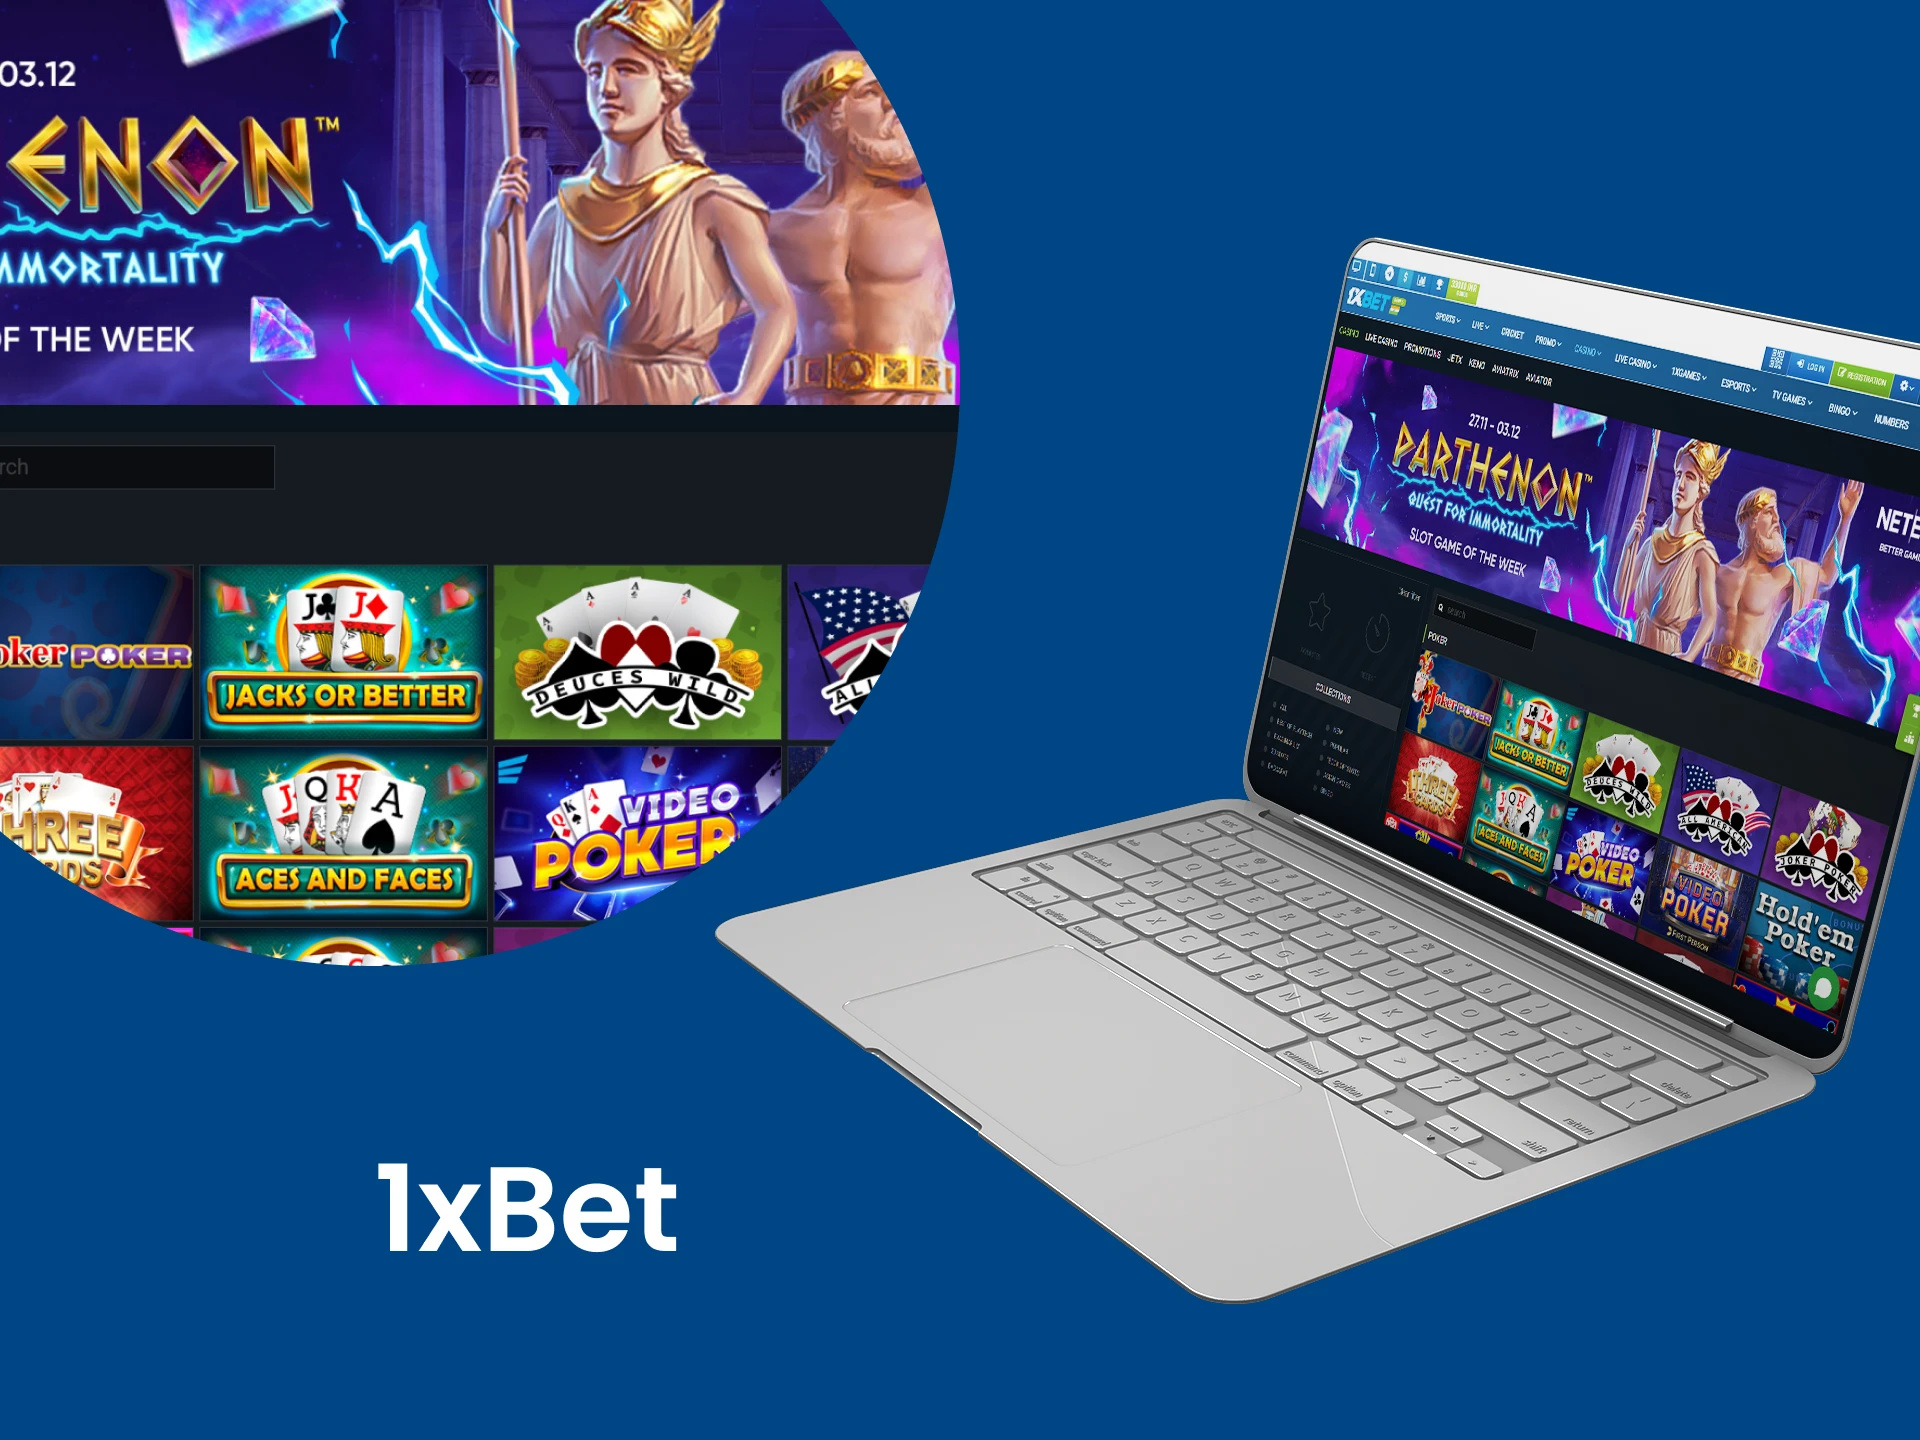 Choose the 1xbet site to play Video Poker.